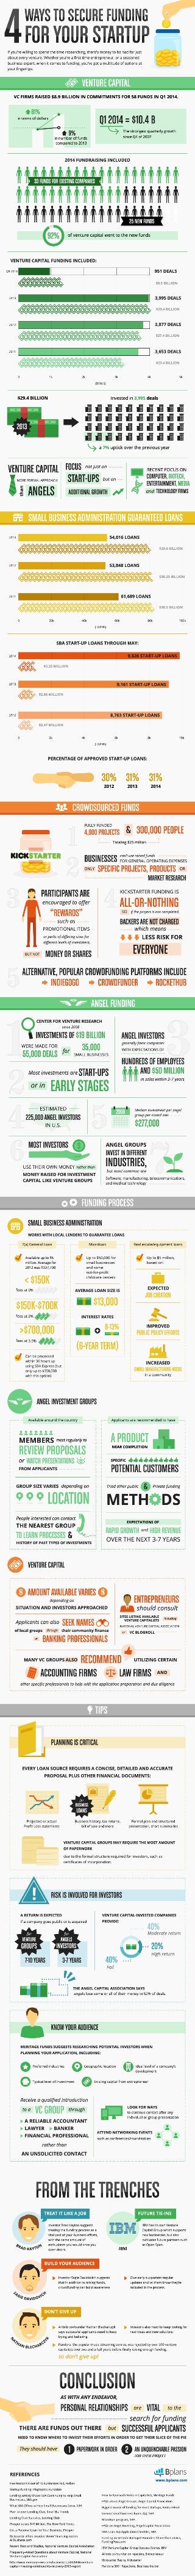 4 Ways to Secure Funding for Your Startup [Infographic]